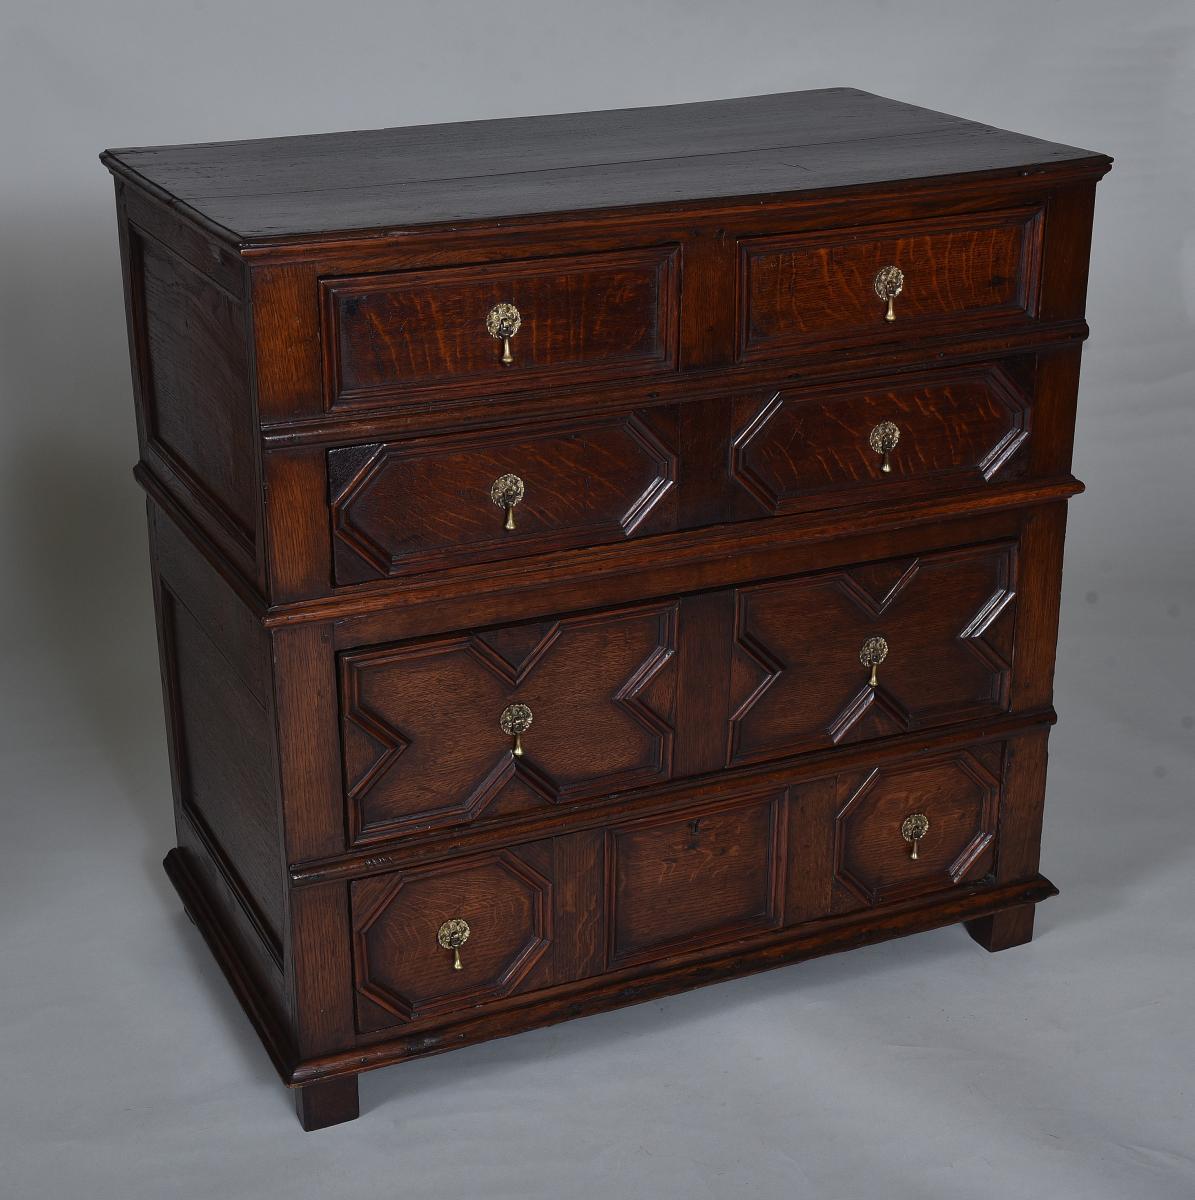 Early oak chest of drawers